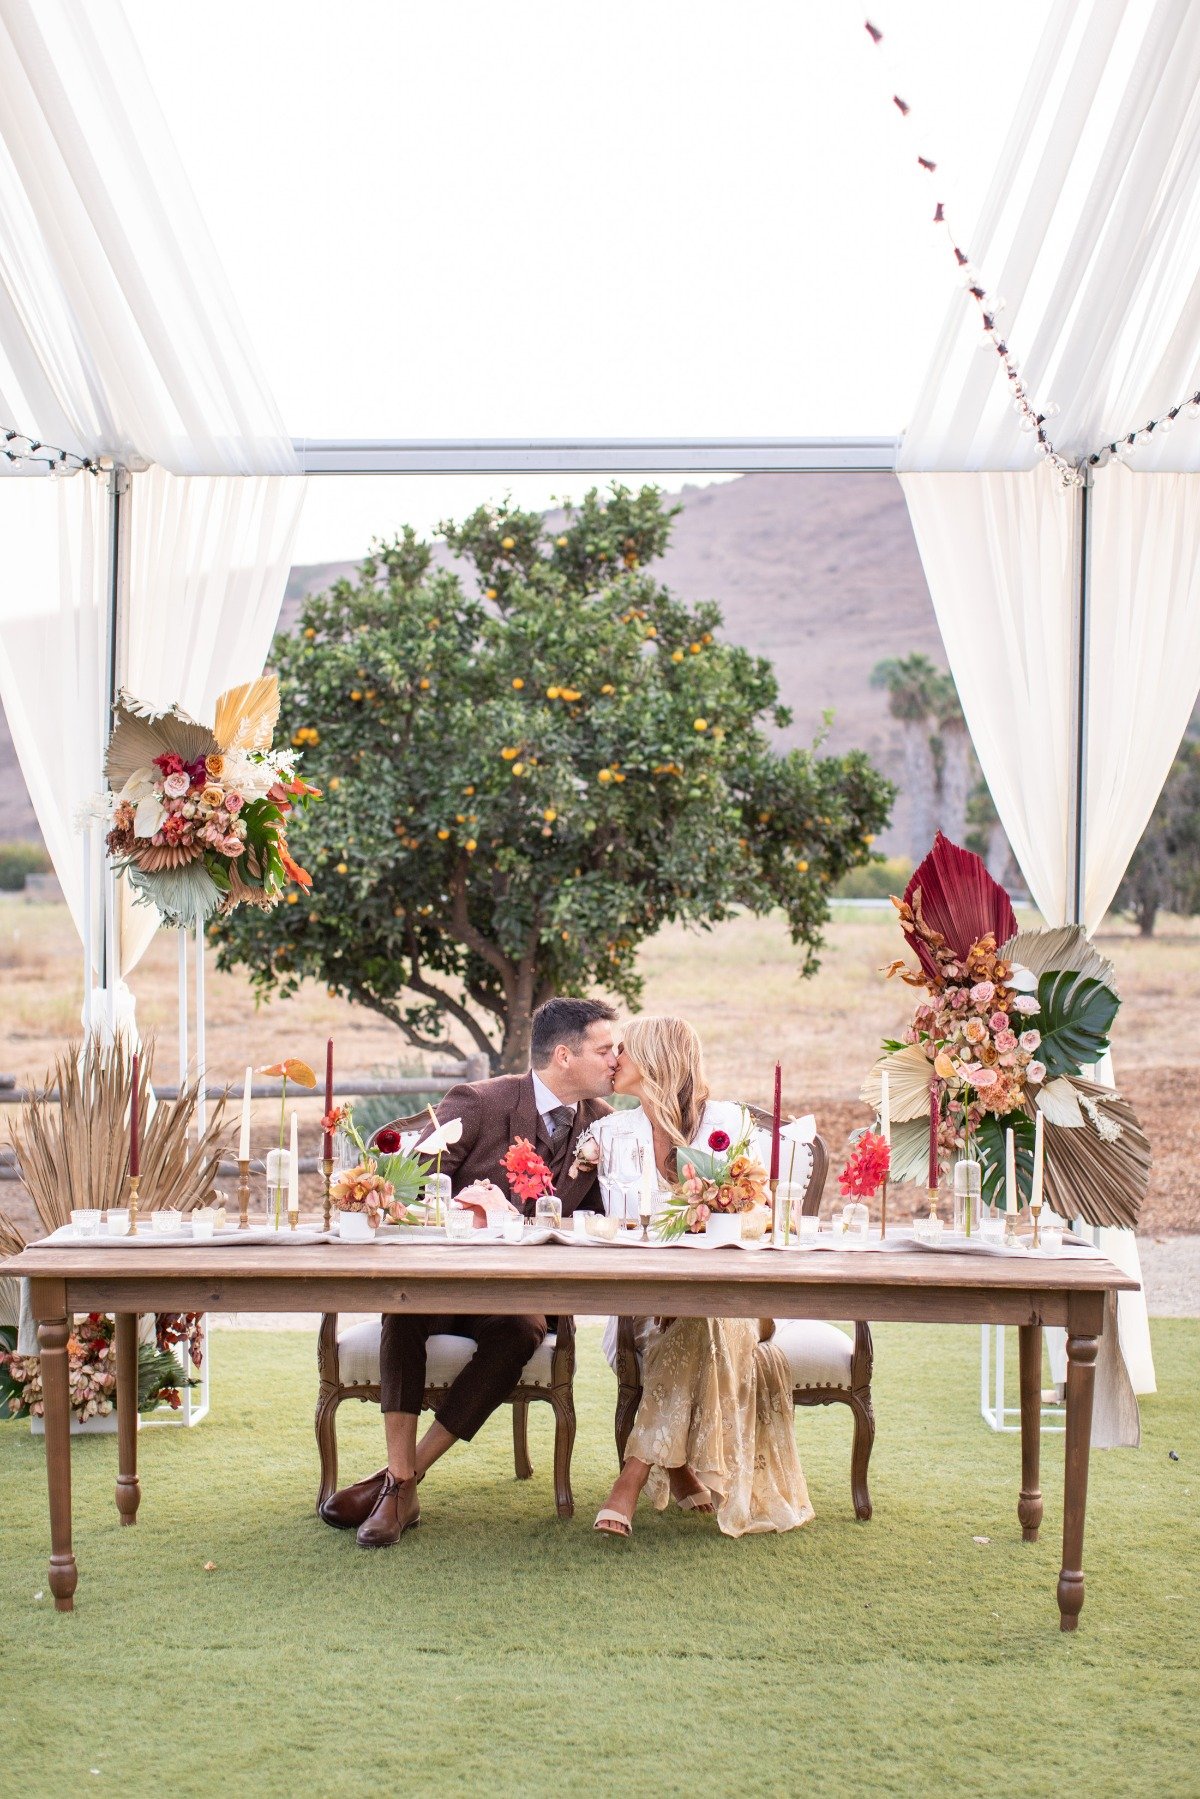 How To Have A Vintage Inspired Wedding At A Historic Landmark in SoCal